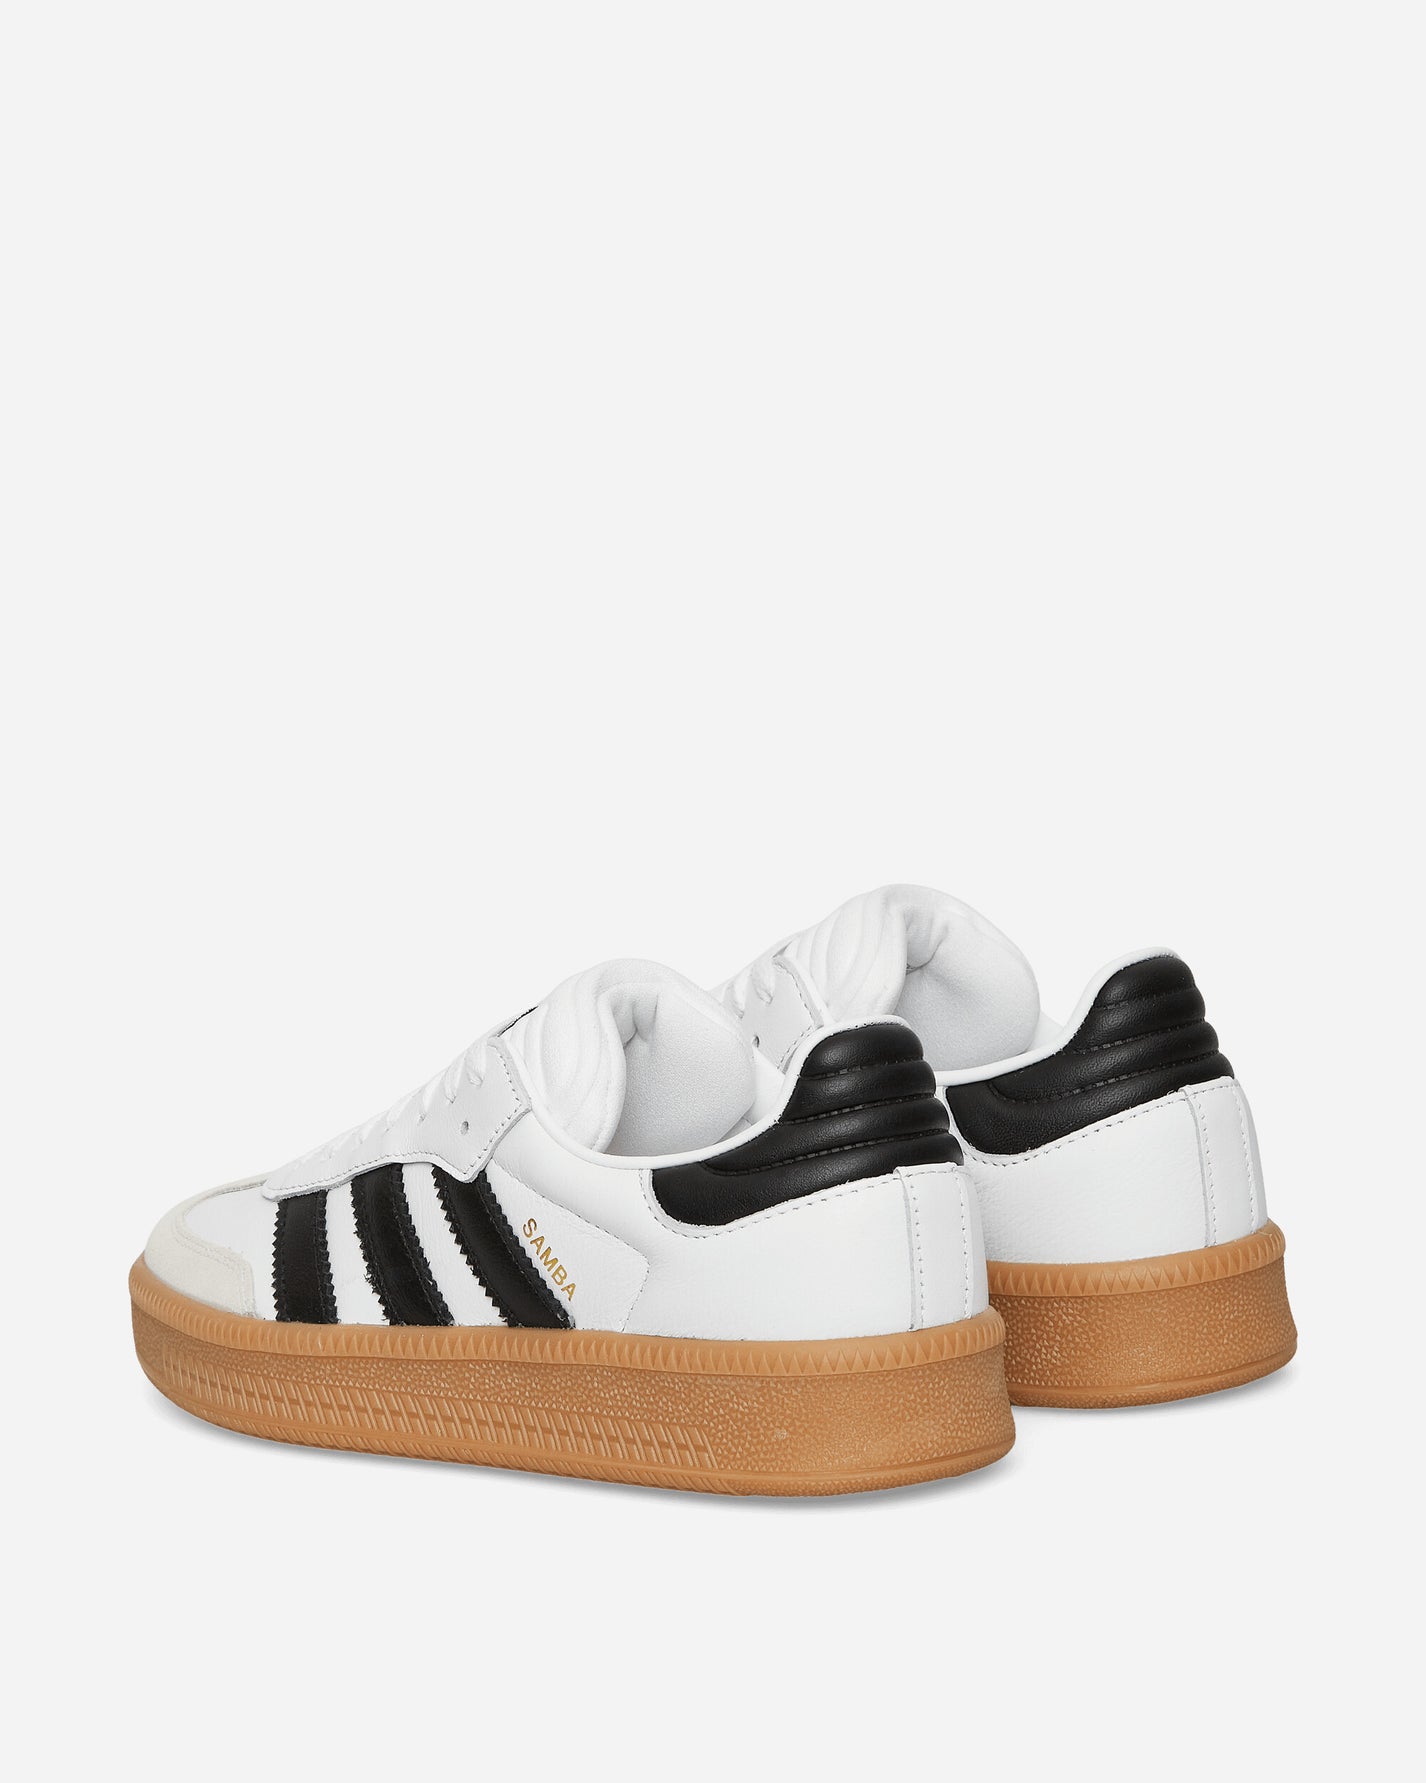 adidas Samba Xlg Ftwr White/Core Black Sneakers Low IE1377